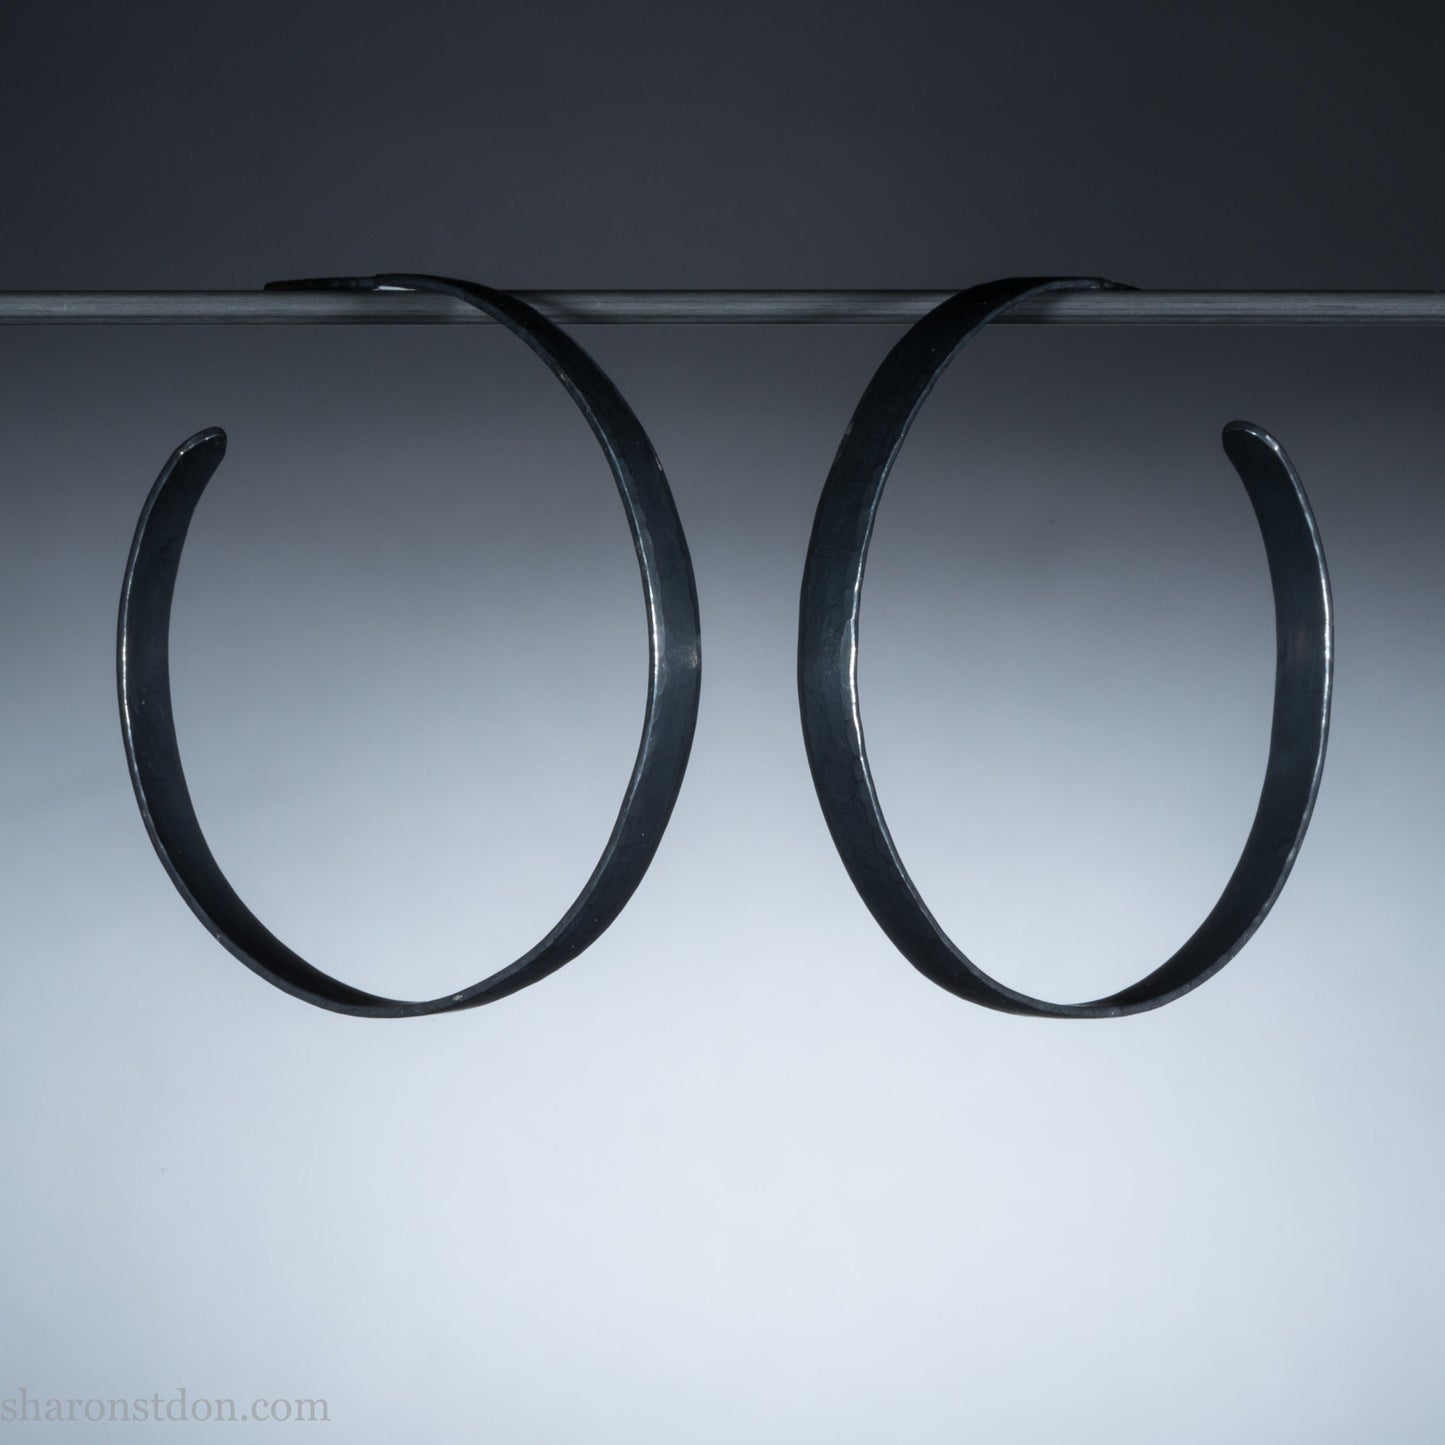 Handmade 925 sterling silver hoop earrings for women. Oxidized black, lightweight large hoop earrings handmade and hammered by Sharon SaintDon in the Pacific Northwest of the USA. 50mm diameter, 5mm wide.